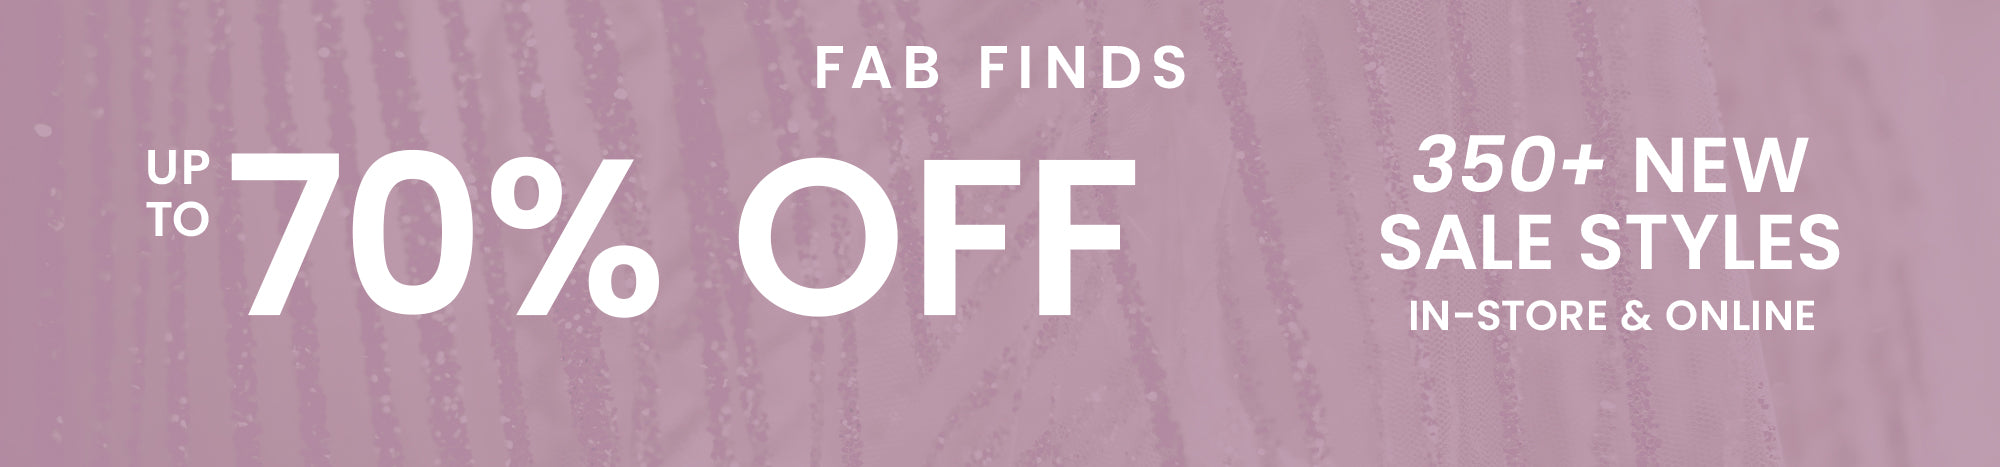 Shop Windsor's Clothing Sale & save up to 70% off new styles featuring a variety of casual to formal dresses, trendy tops, bustiers, pants, cargos, heels, & fab fashion finds and apparel on sale now!